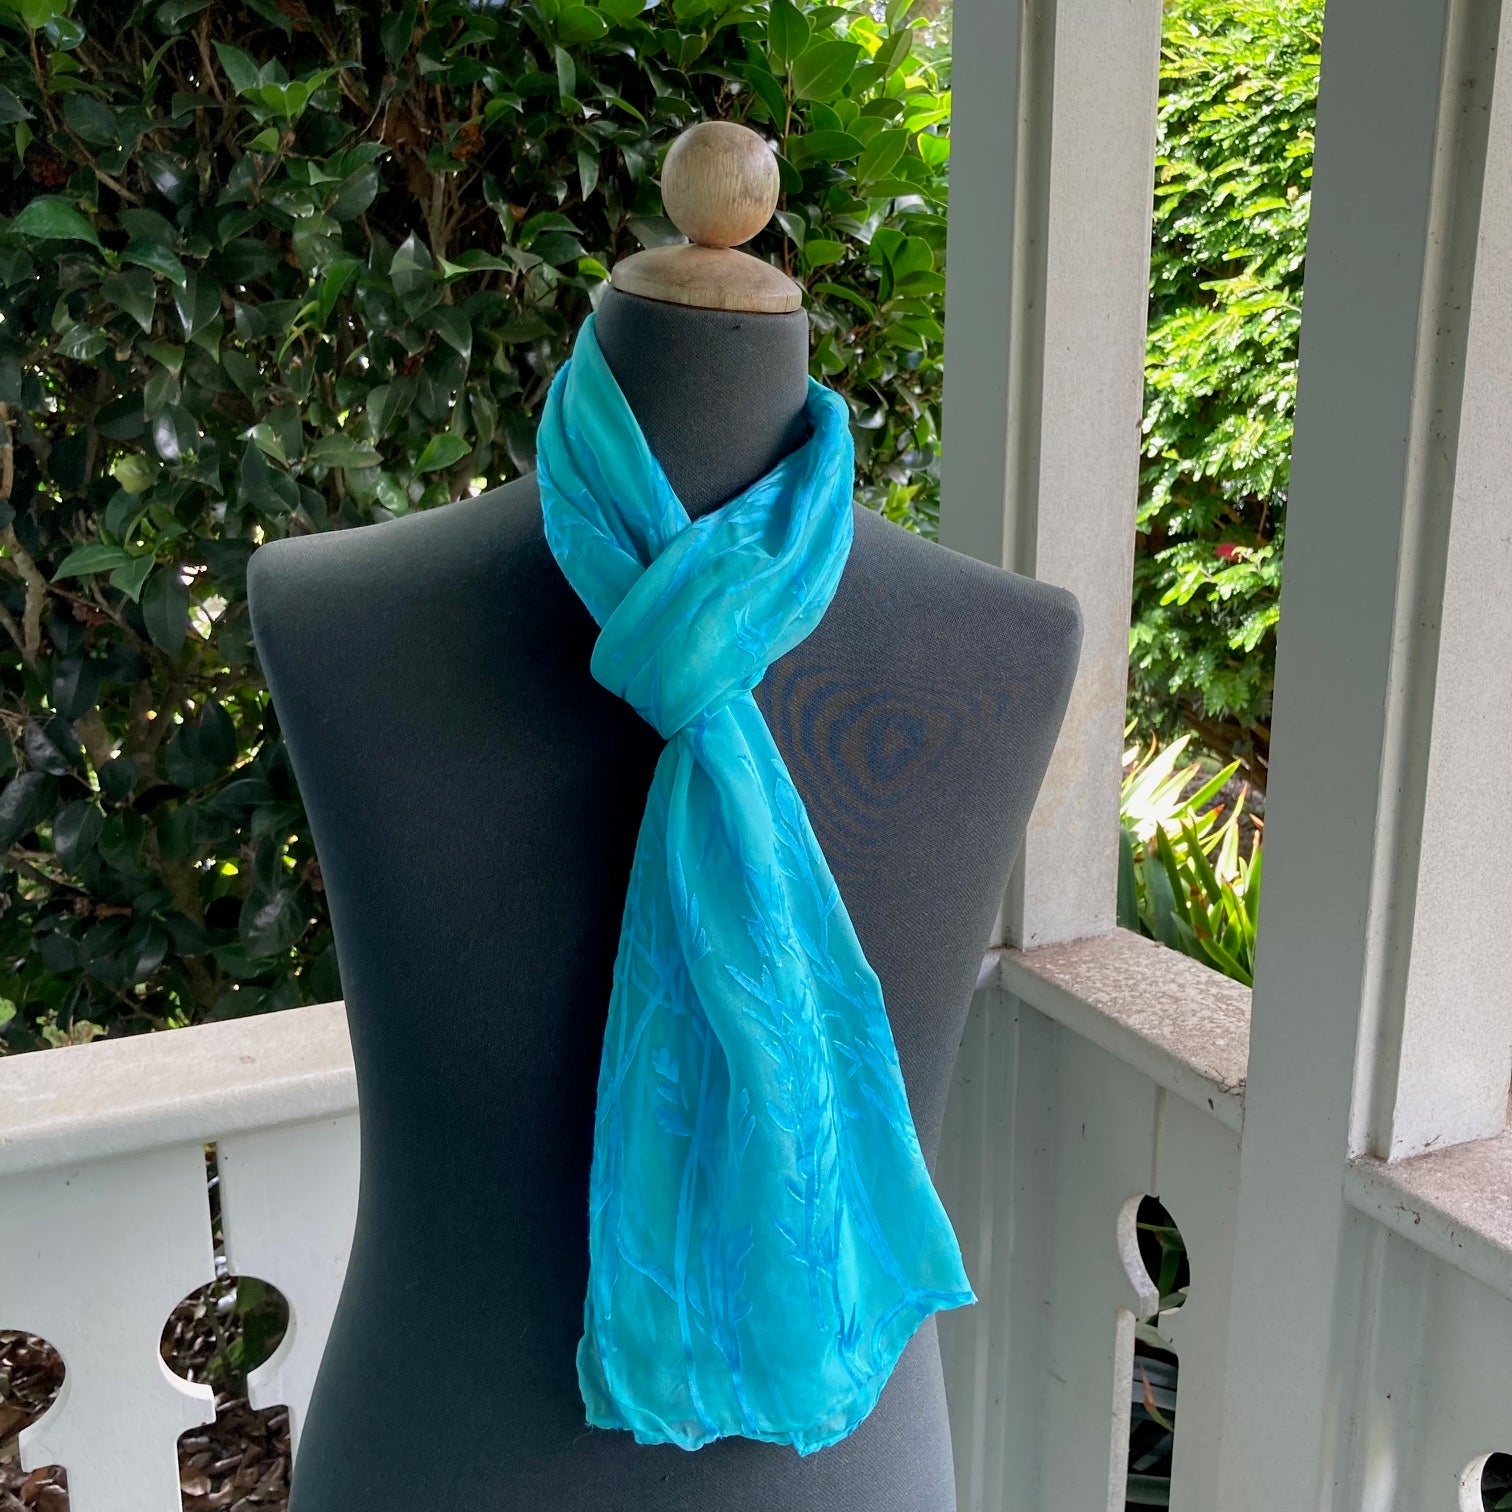 Devore Silk & Rayon Scarf in Turquoise in the Bamboo Design